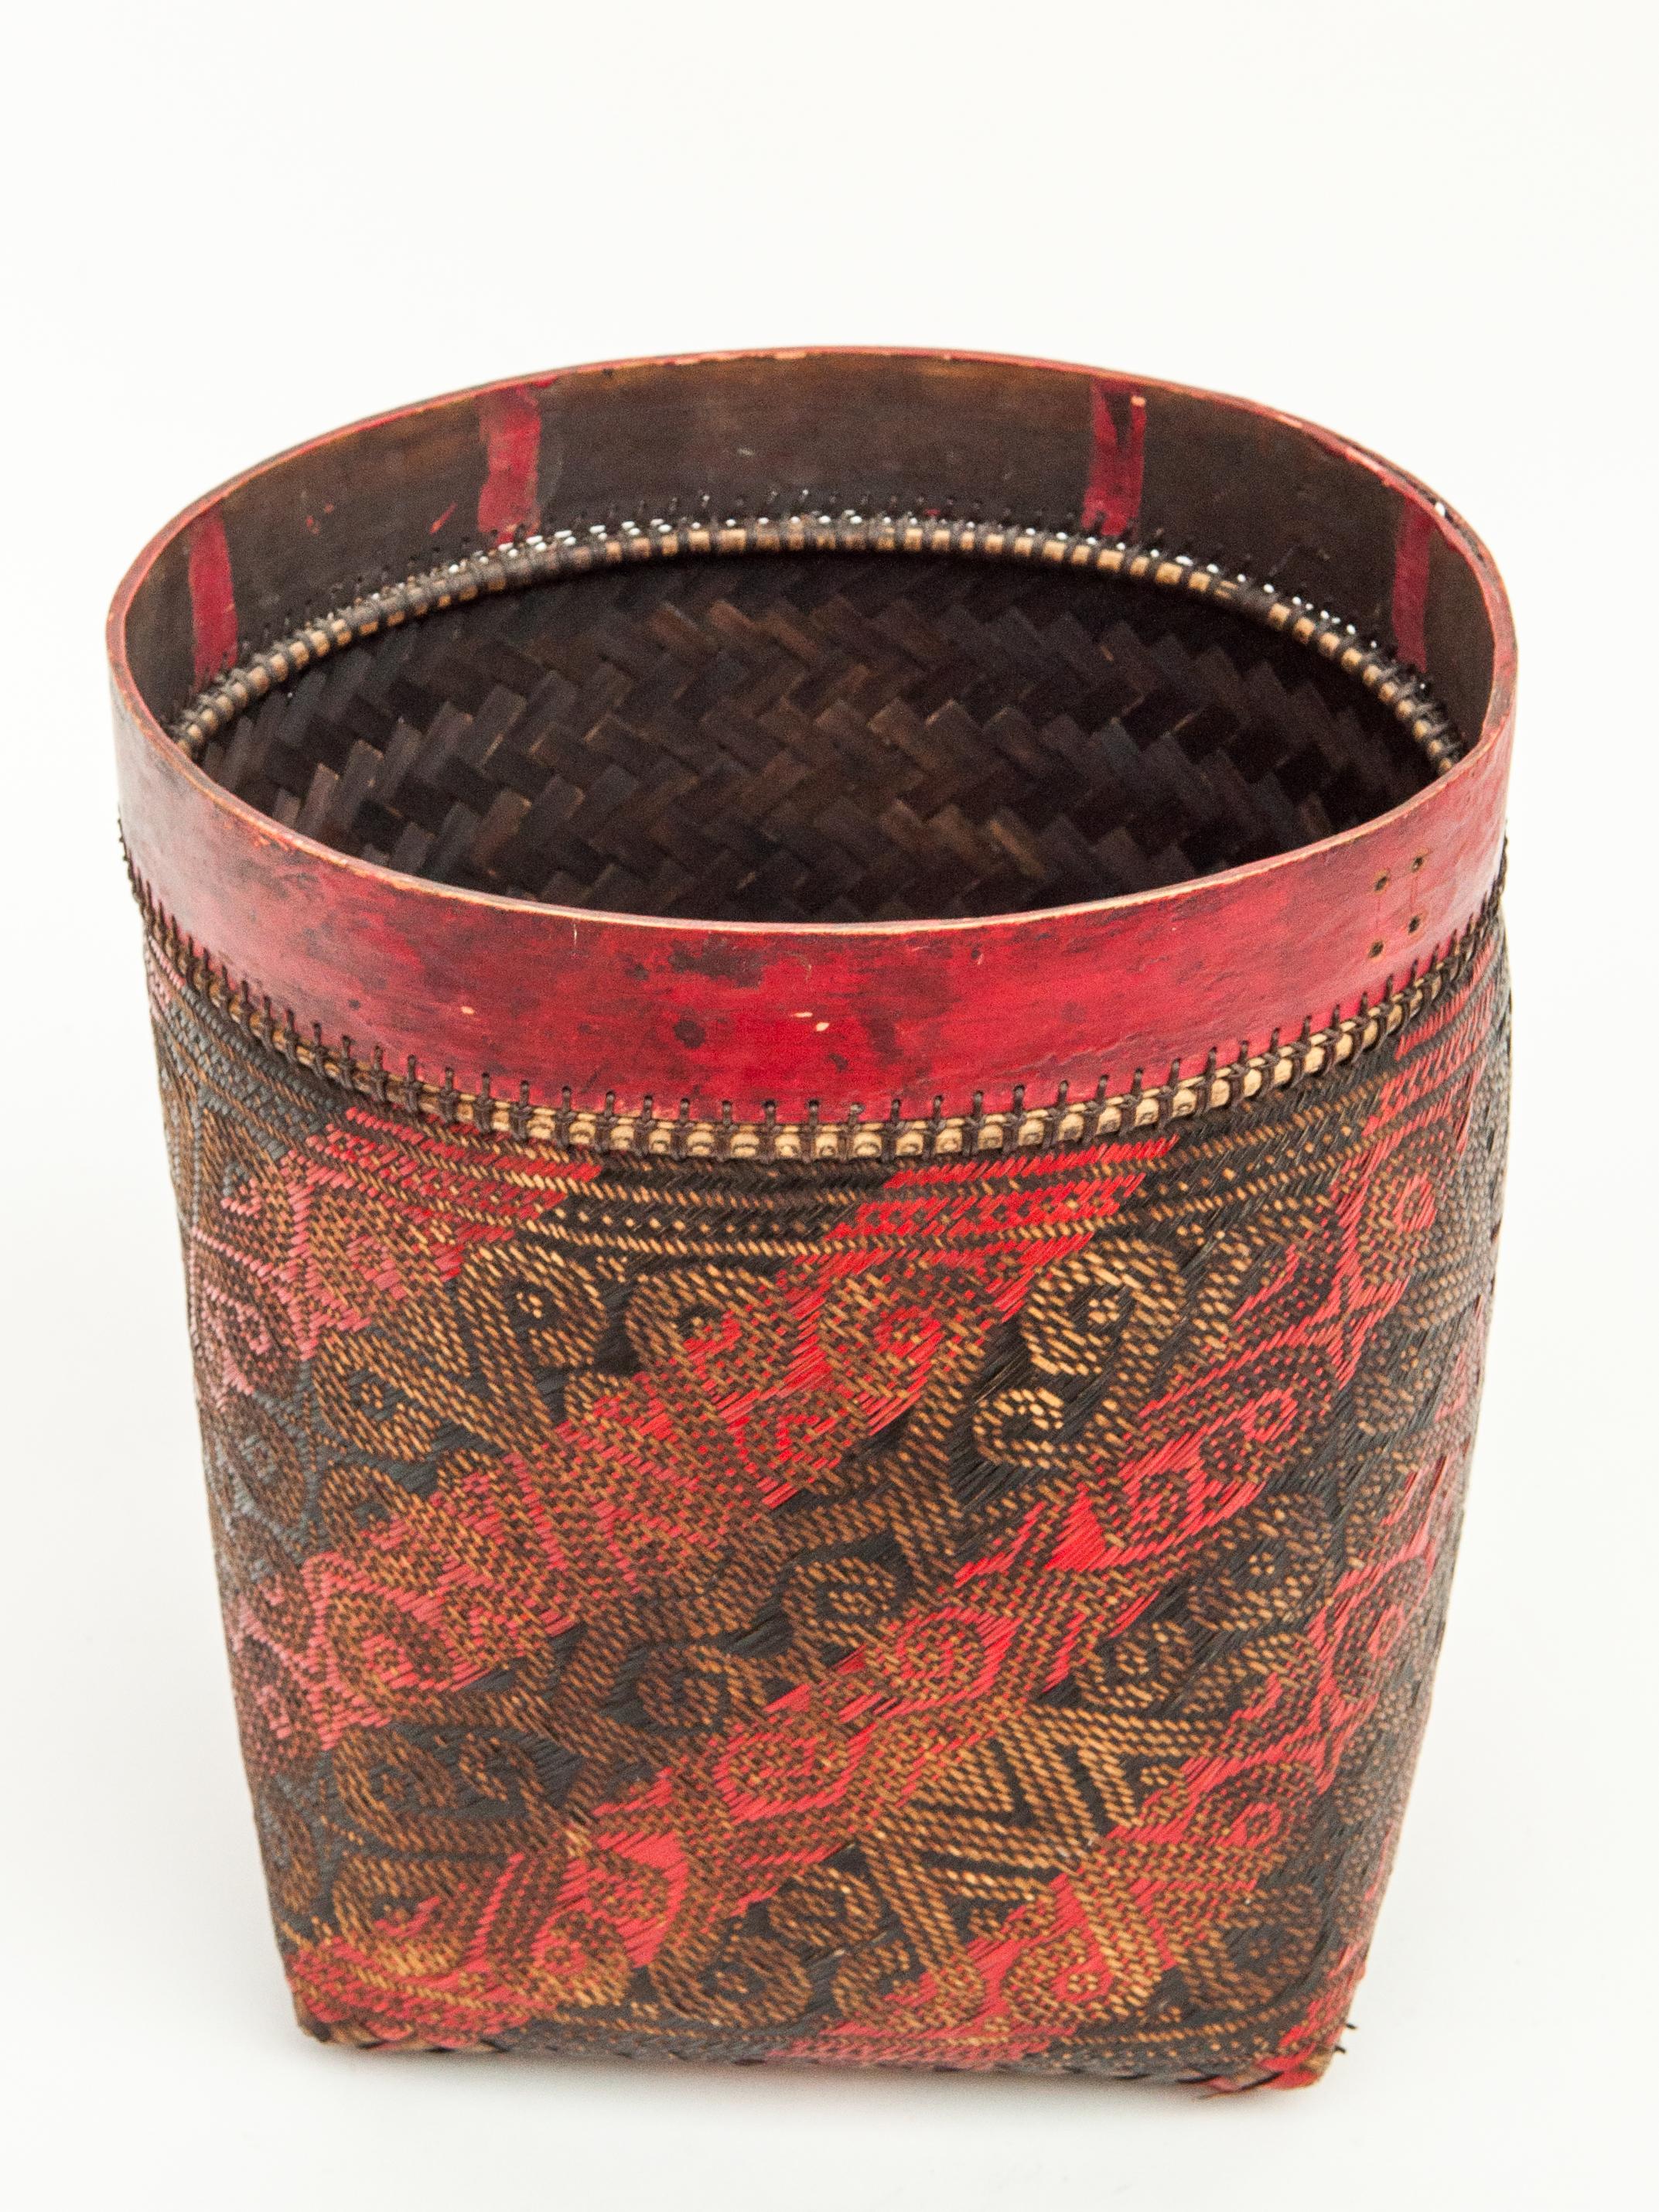 Vintage seed basket. With woven design, Iban of Borneo, mid-late 20th century.
Offered by Bruce Hughes.
This finely woven basket is double woven of bamboo and rattan in stripes of red and black, and incorporates vegetative fertility motifs in a